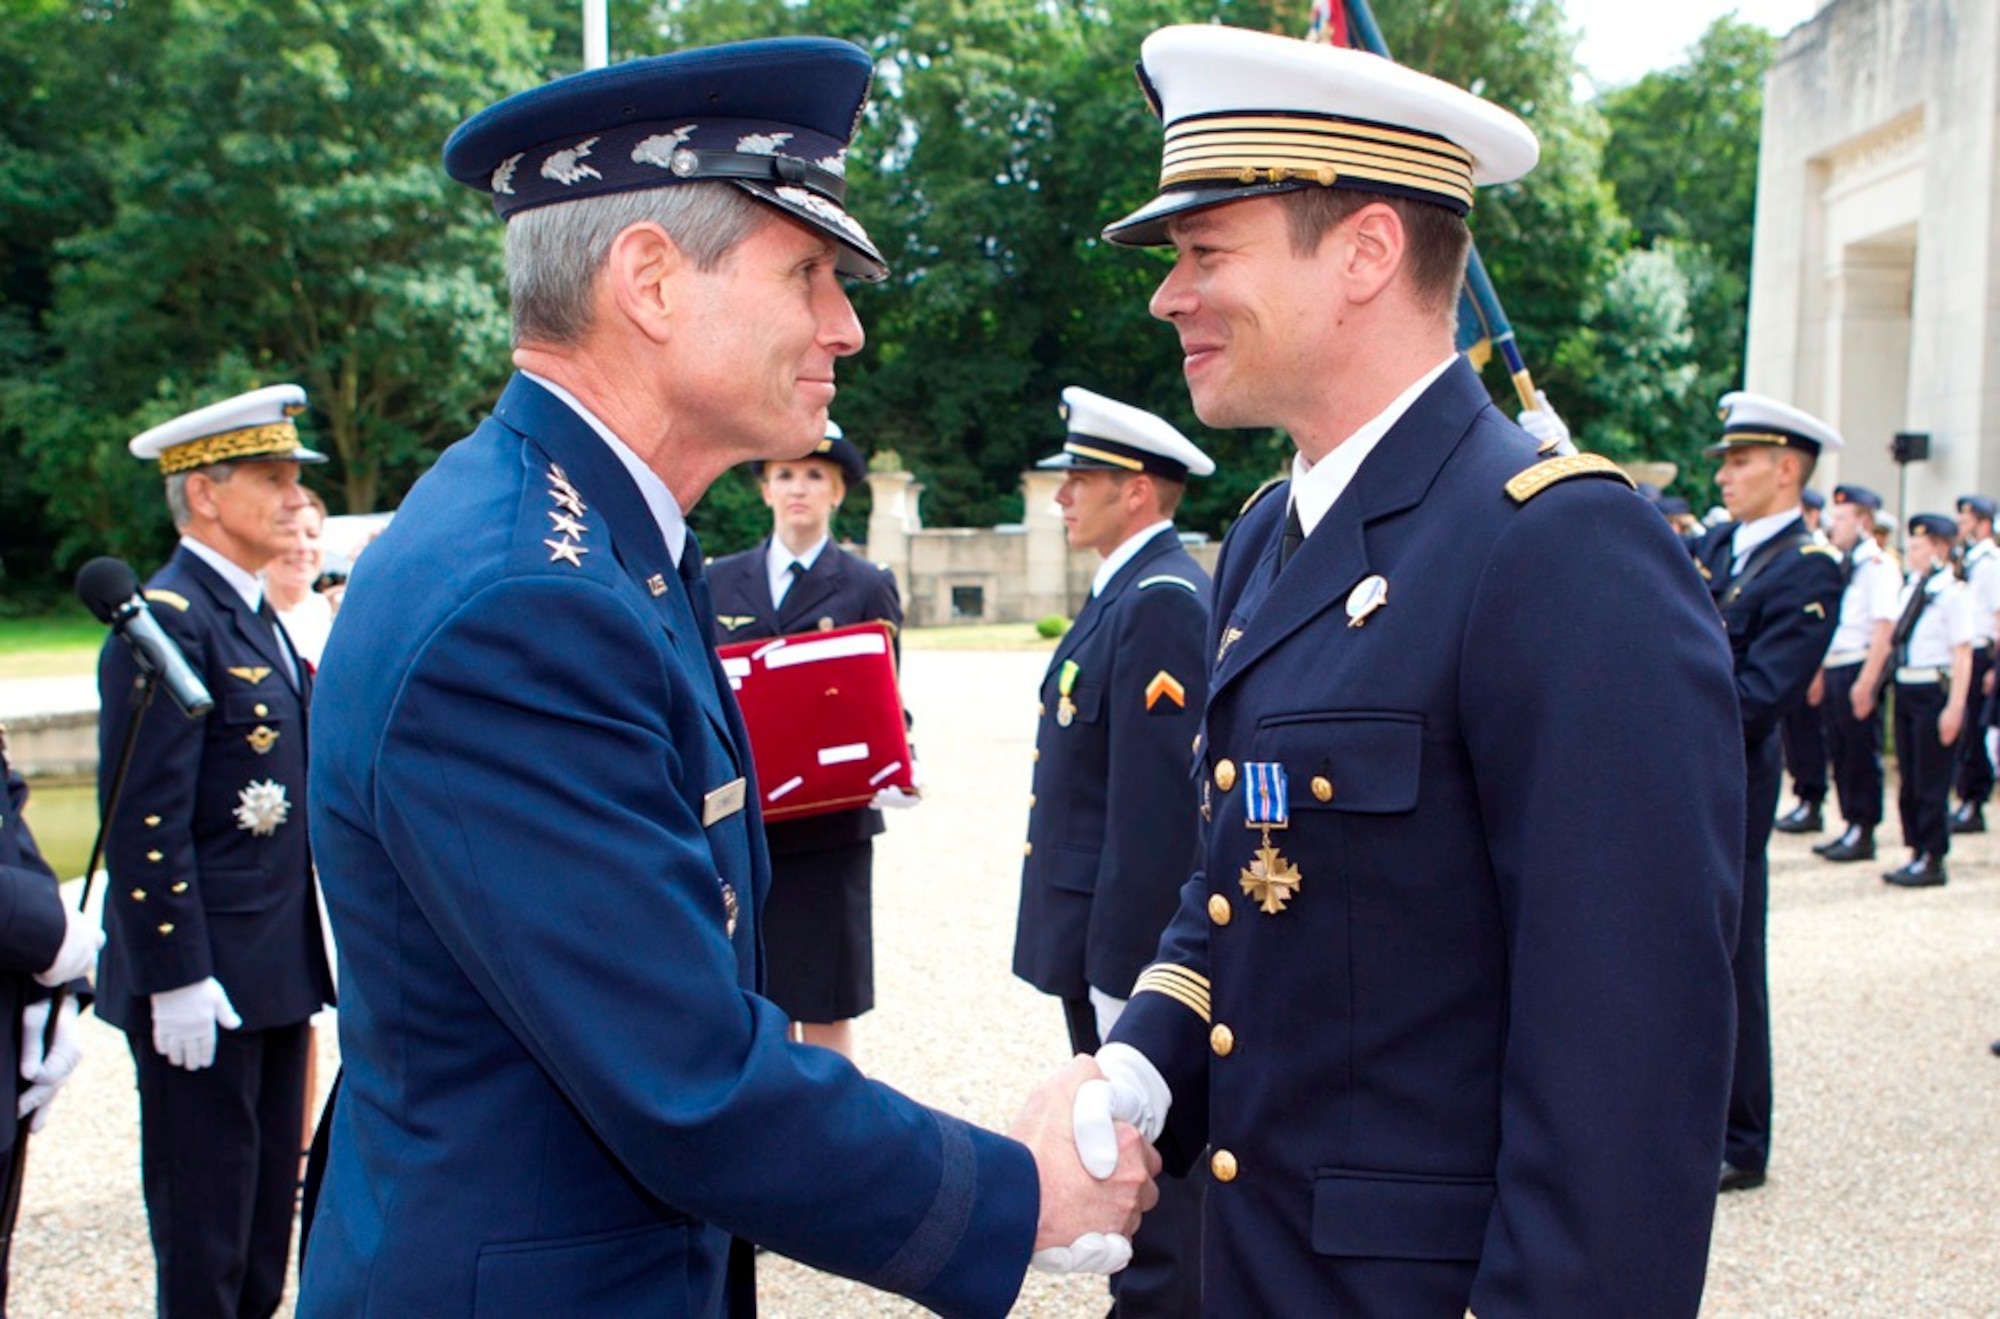 Air Force Chief of Staff Gen. Norton Schwartz congratulates French air force Maj. Guillaume Vernet after presenting him with the Distinguished Flying Cross with Valor July 13, 2011, at the Lafayette Escadrille Memorial in Marnes-la-Coquette, France.  Vernet was awarded the decoration for repeatedly flying into hostile territory in December 2009 while deployed to Afghanistan as an exchange officer with the 41st Rescue Squadron from Moody Air Force Base, Ga.  During that mission, Vernet rescued an urgent casualty whose injury put the lives of 160 British soldiers in jeopardy.  (Courtesy photo)